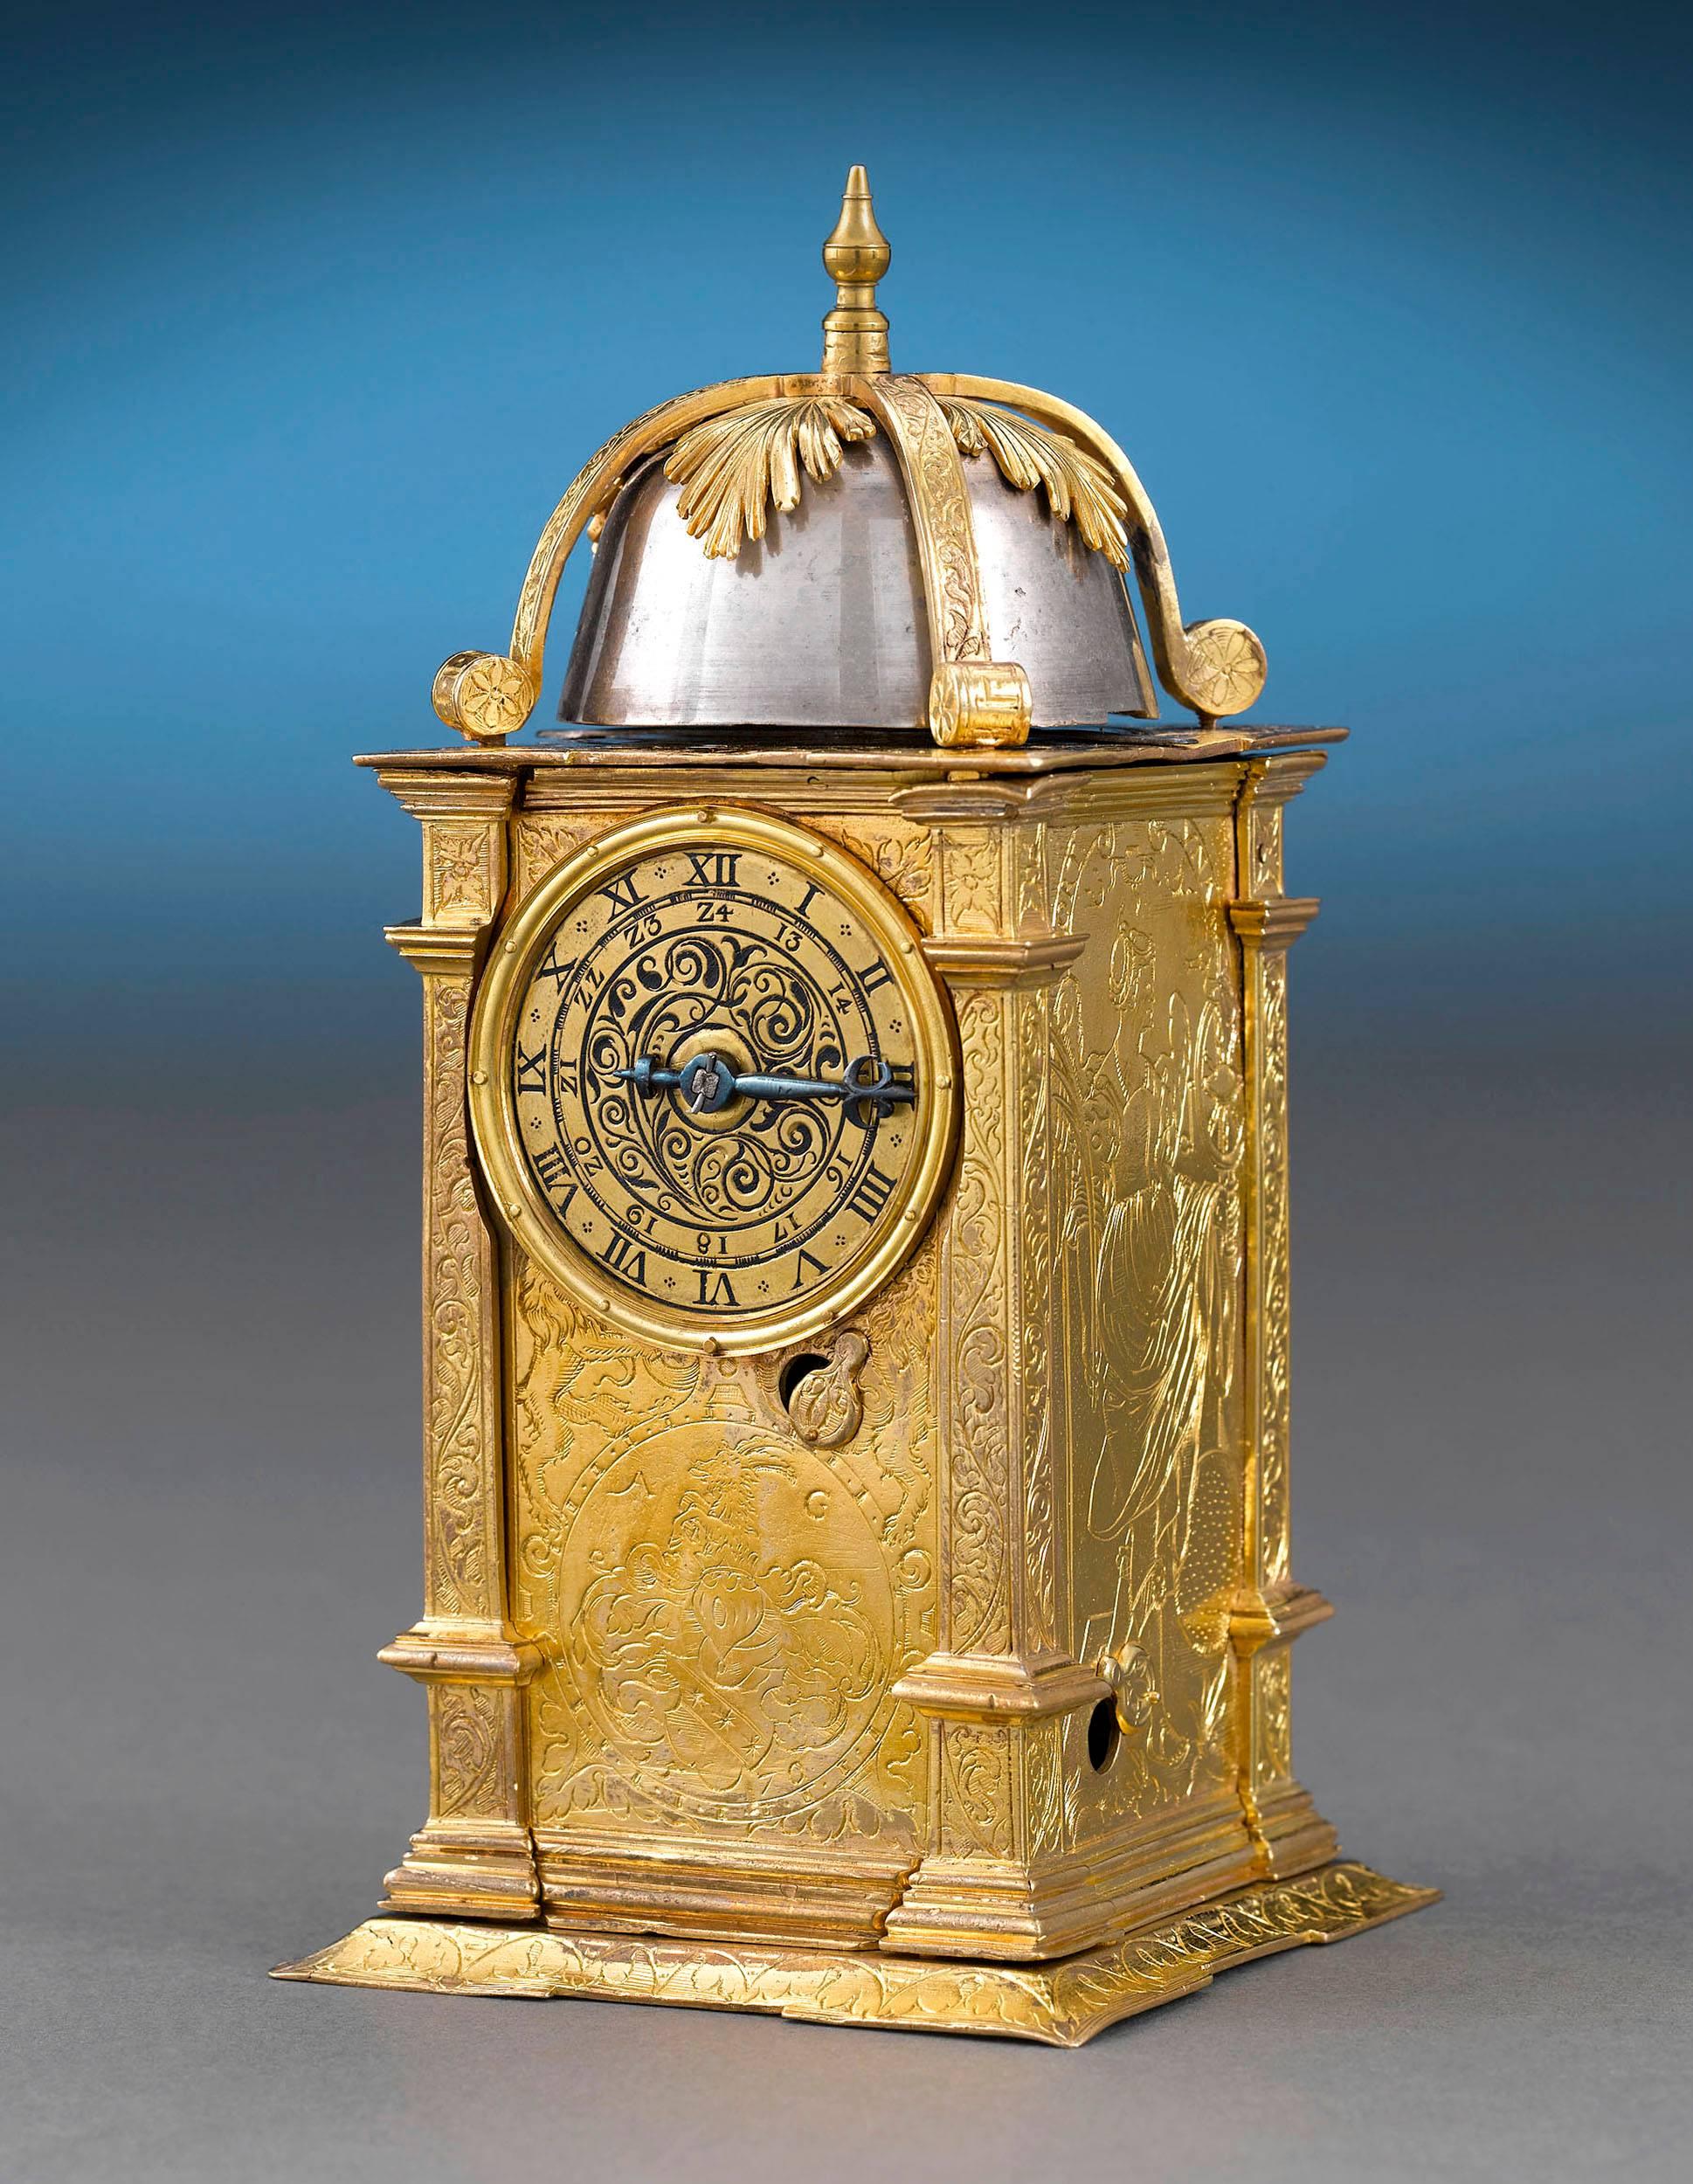 This immensely rare Renaissance turret clock or table clock, was considered both a scientific marvel and an item of luxury during the period. This incredible piece is encased in fire gilt brass crafted to expresses Renaissance exuberance and